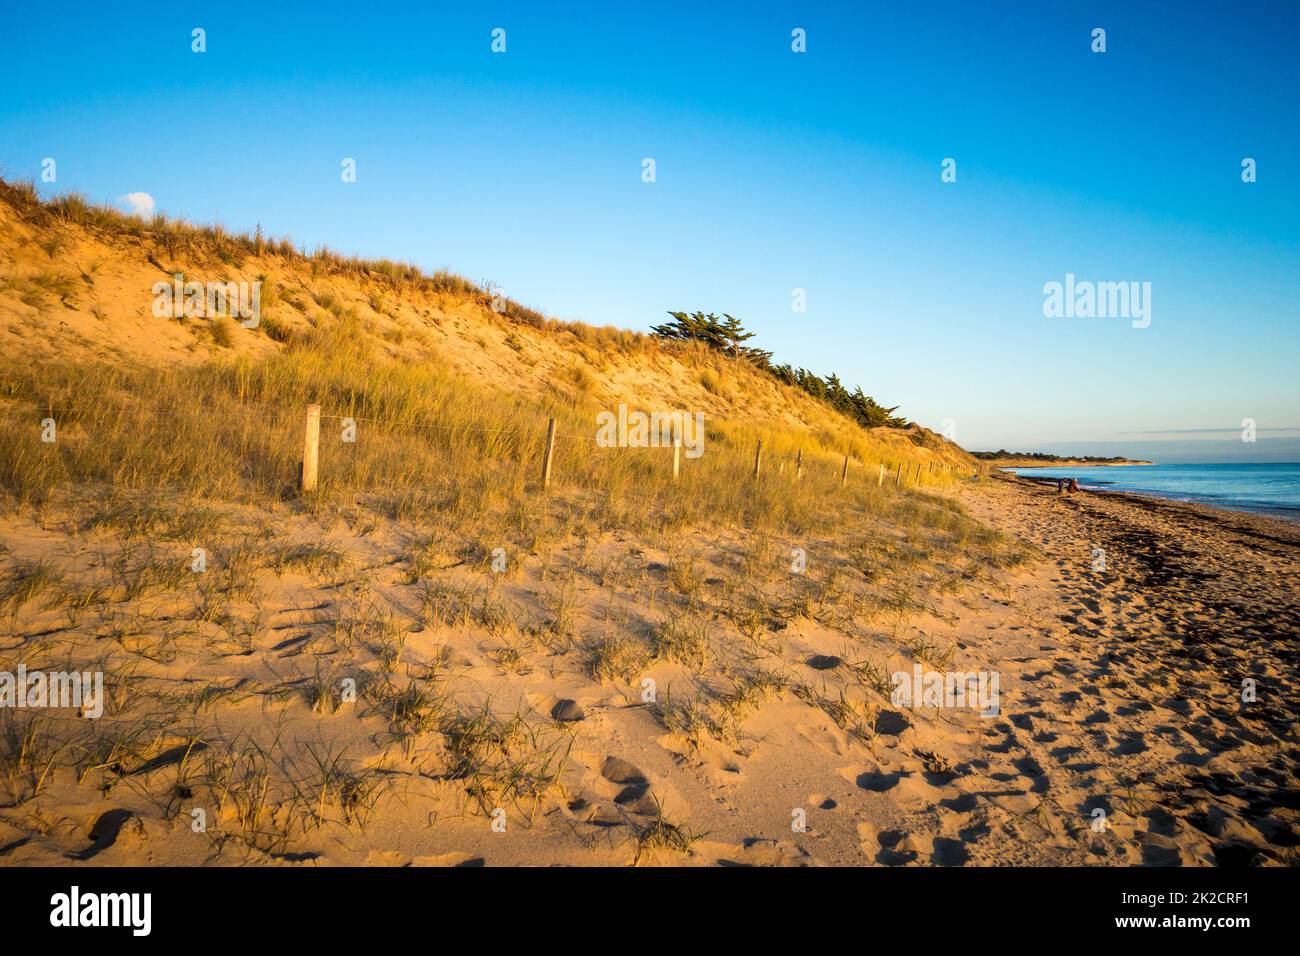 Sand dune and fence on a beach at sunset. Re Island Stock Photo